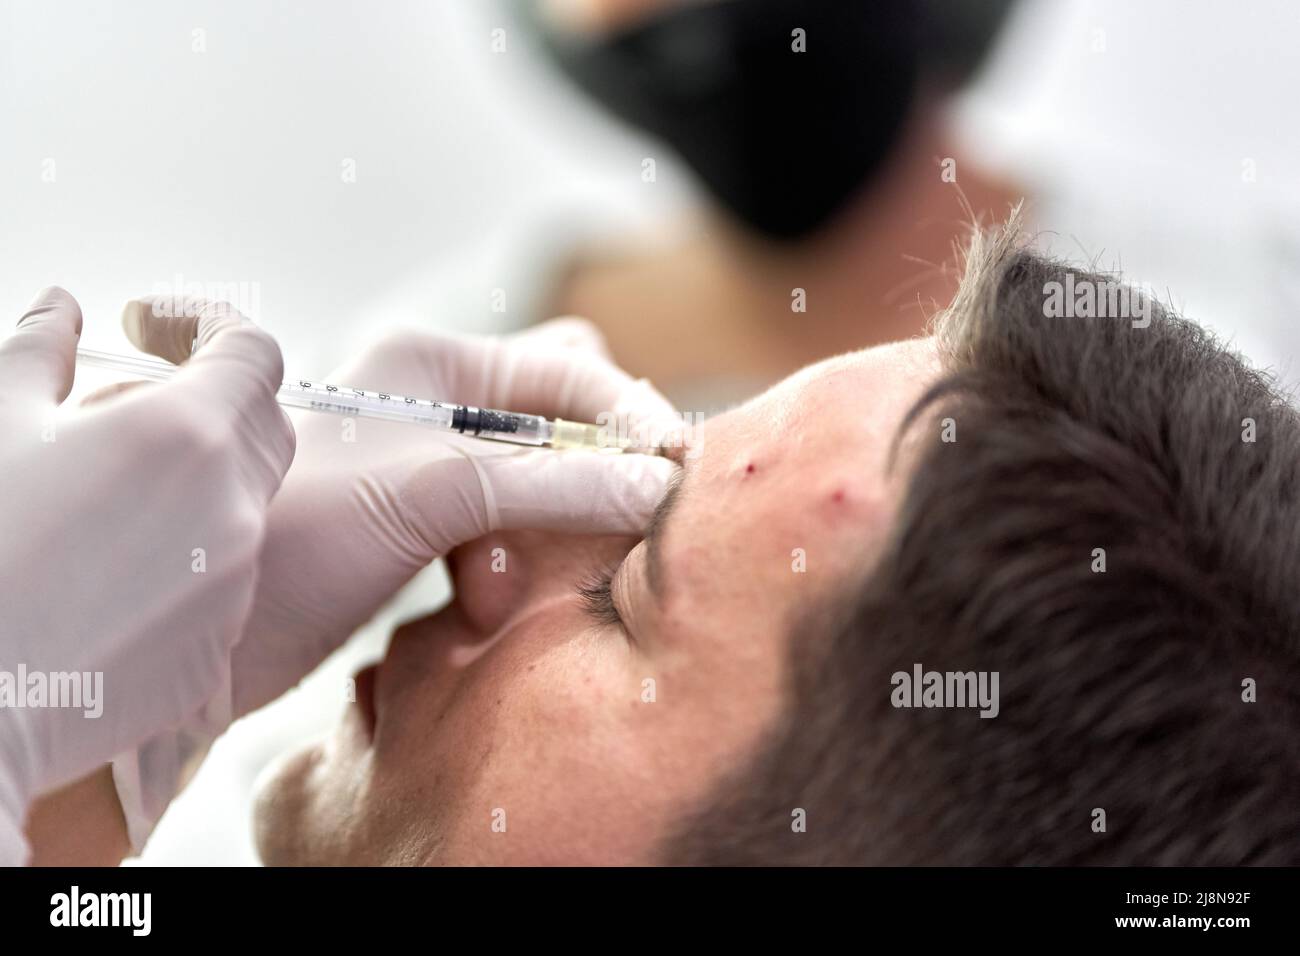 Focus on a botox injection entering the skin of a patient's forehead Stock Photo